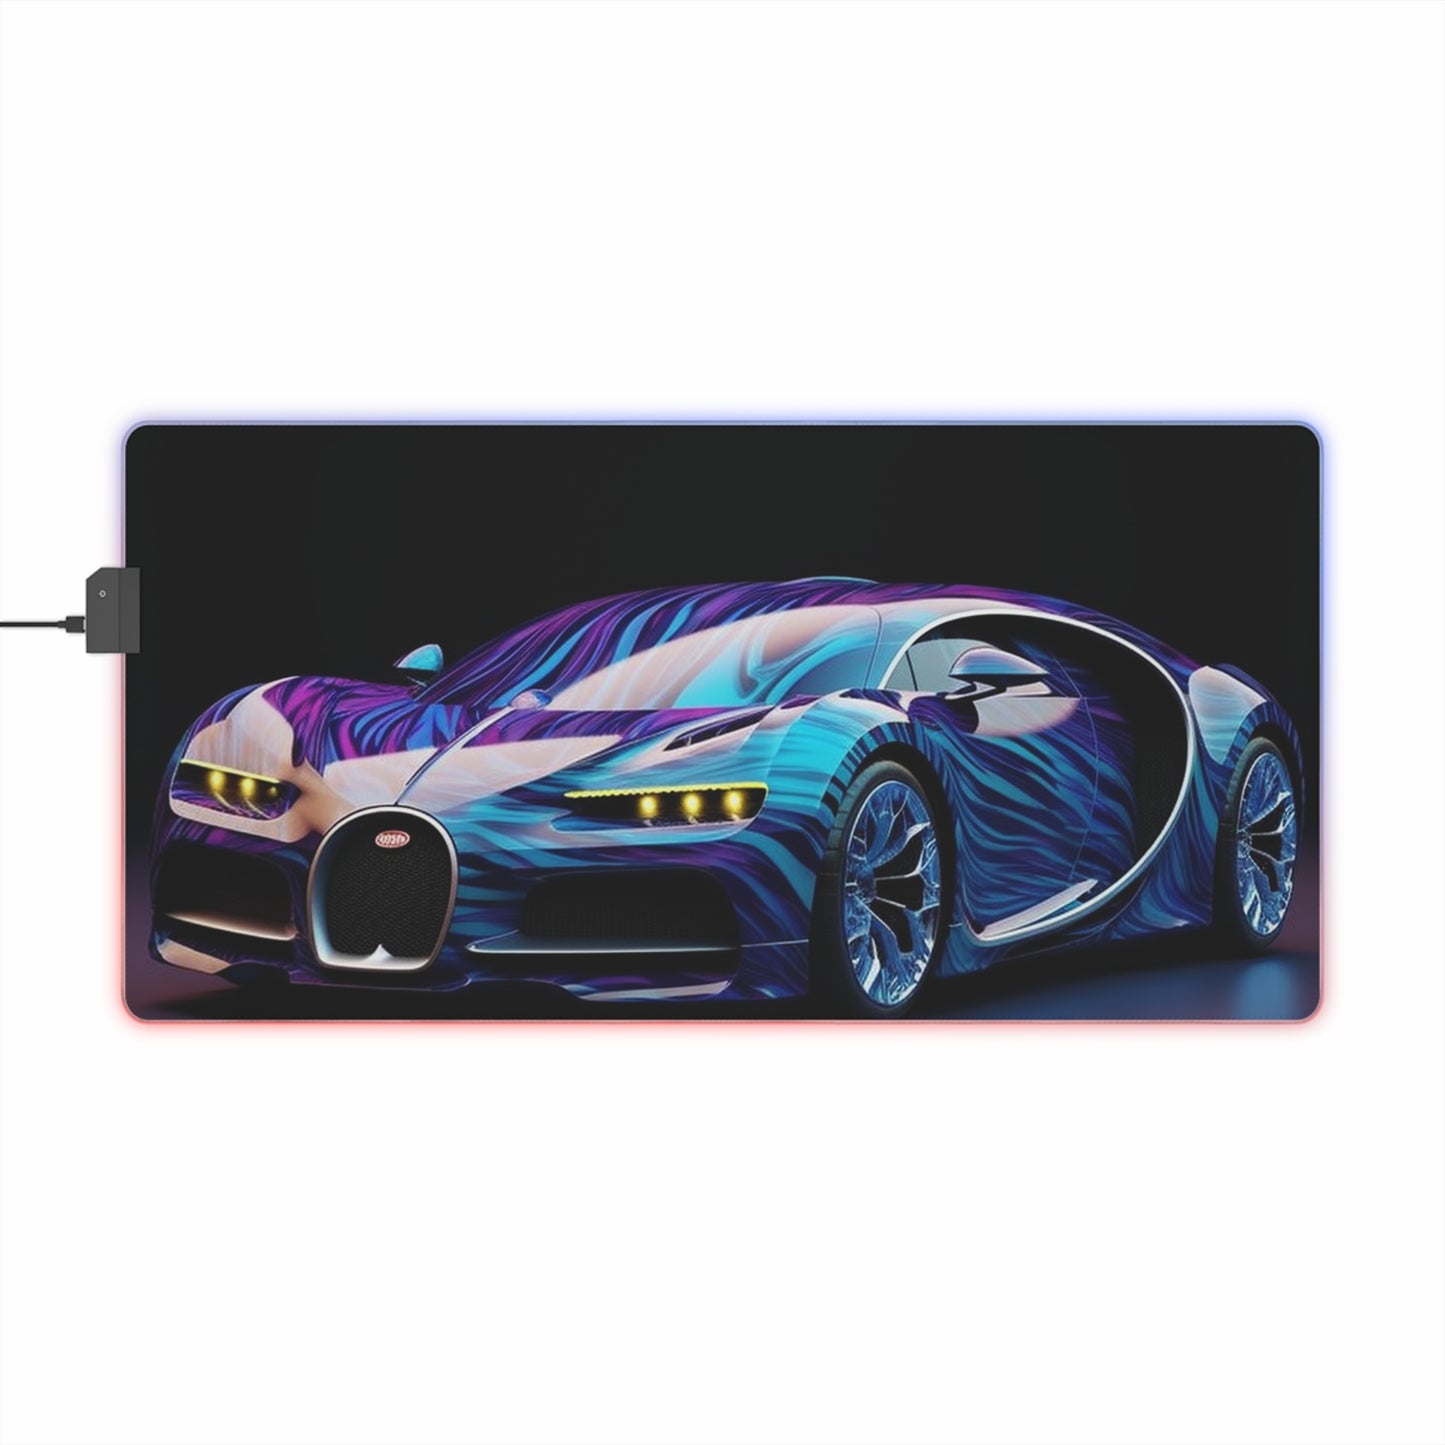 LED Gaming Mouse Pad Bugatti Abstract Flair 3